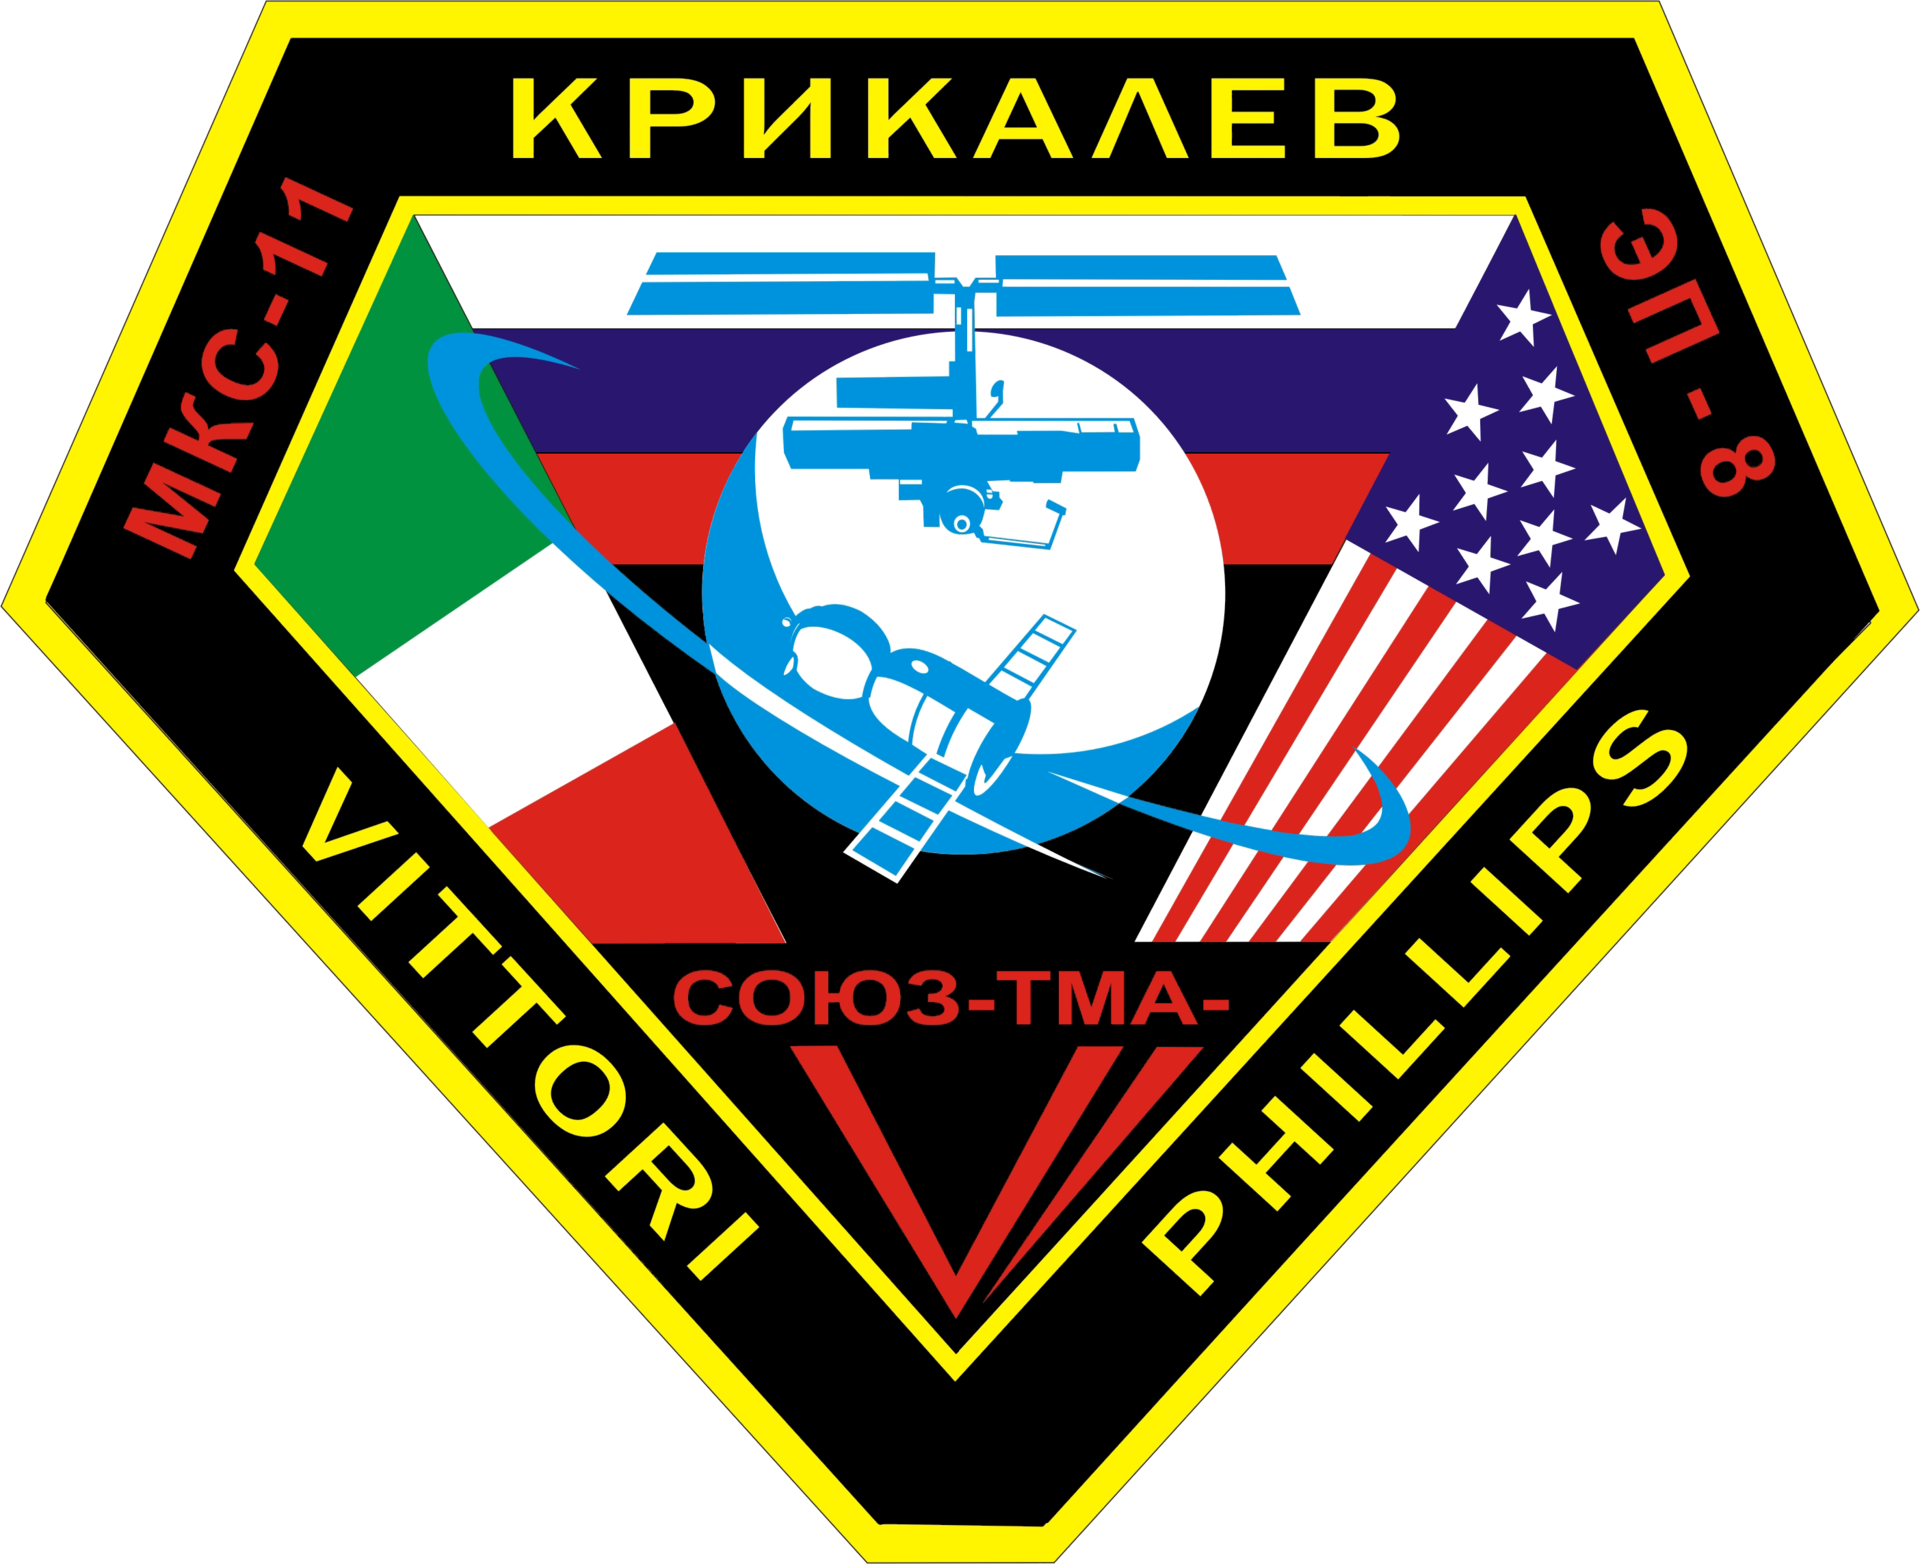 Mission patch for Soyuz TMA-6